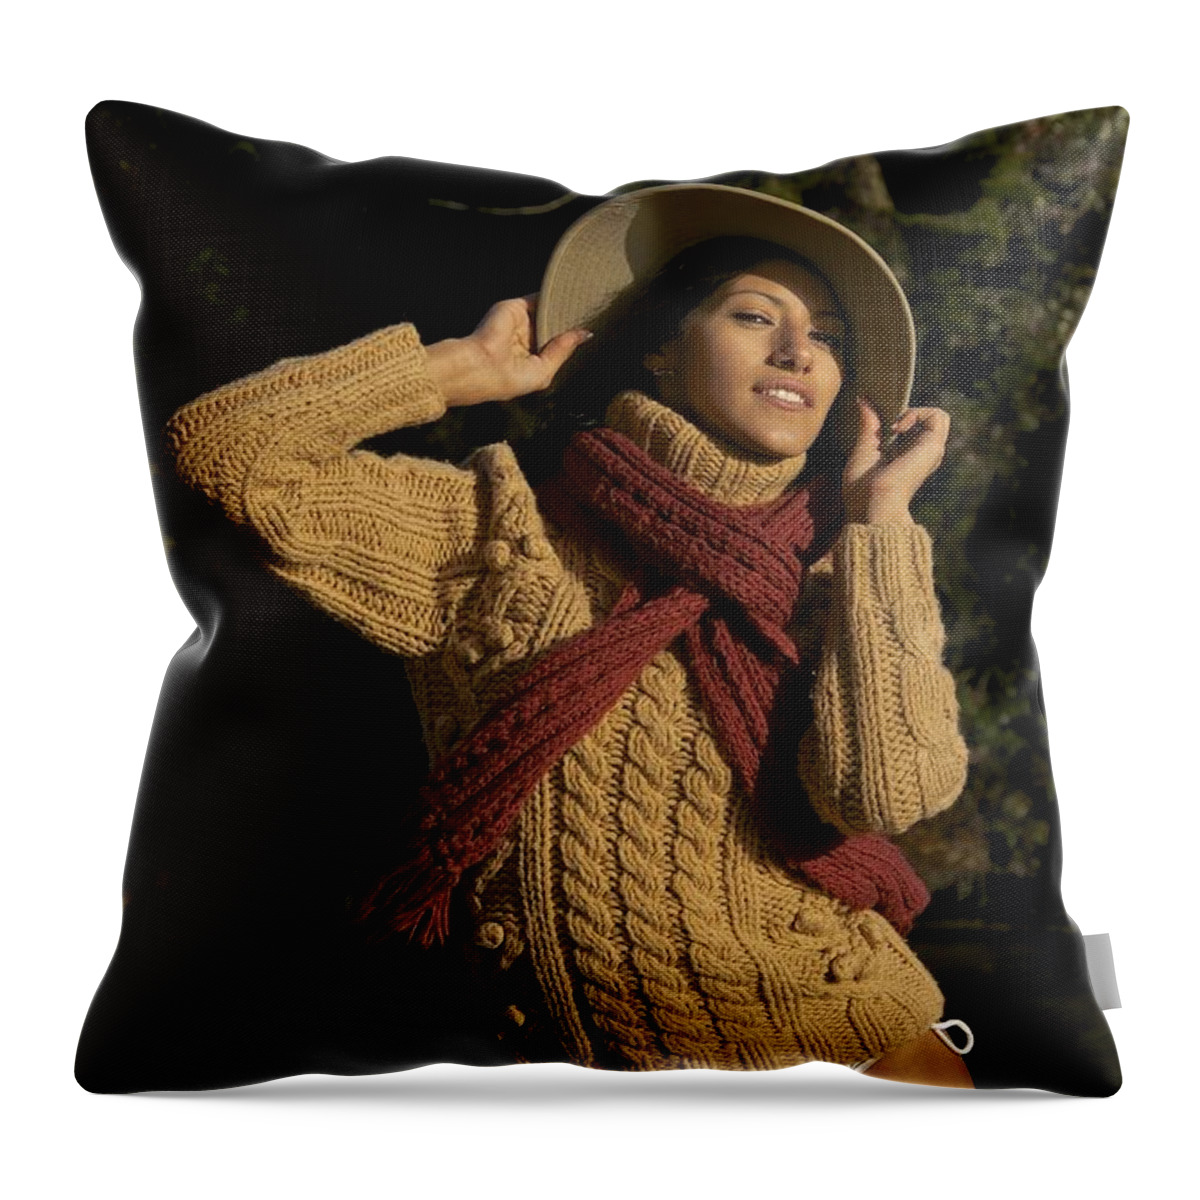 Photography Throw Pillow featuring the photograph Winter Bikini by Sean Griffin